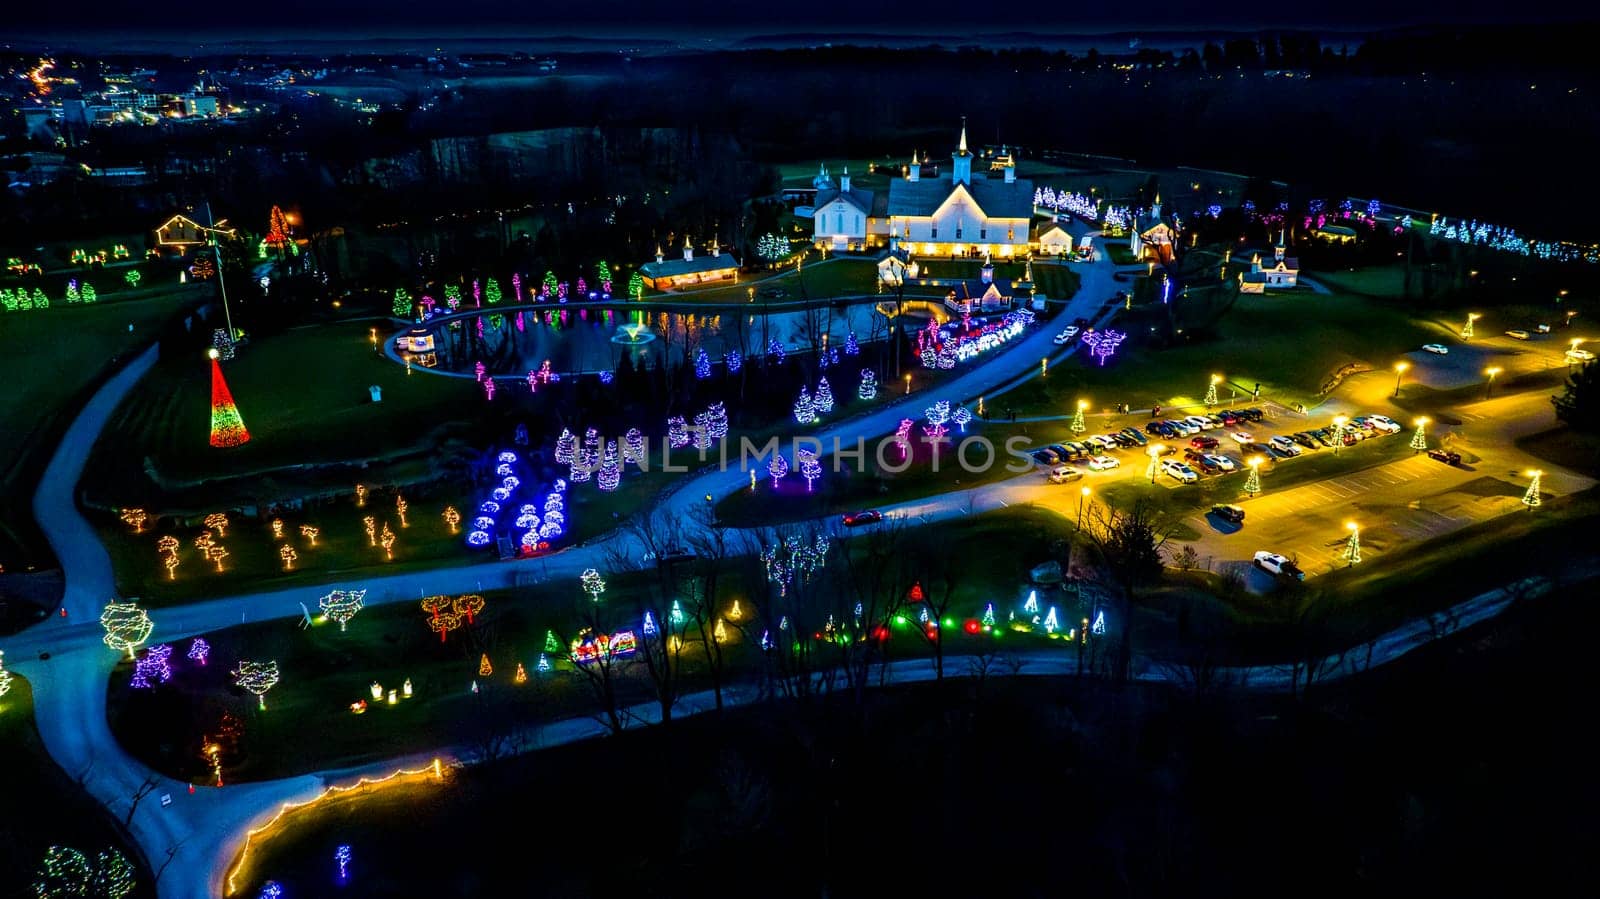 Expansive Aerial View Of A Festive Grounds Illuminated With Holiday Lights Featuring A Path To A Pond And Multiple Buildings At Night.